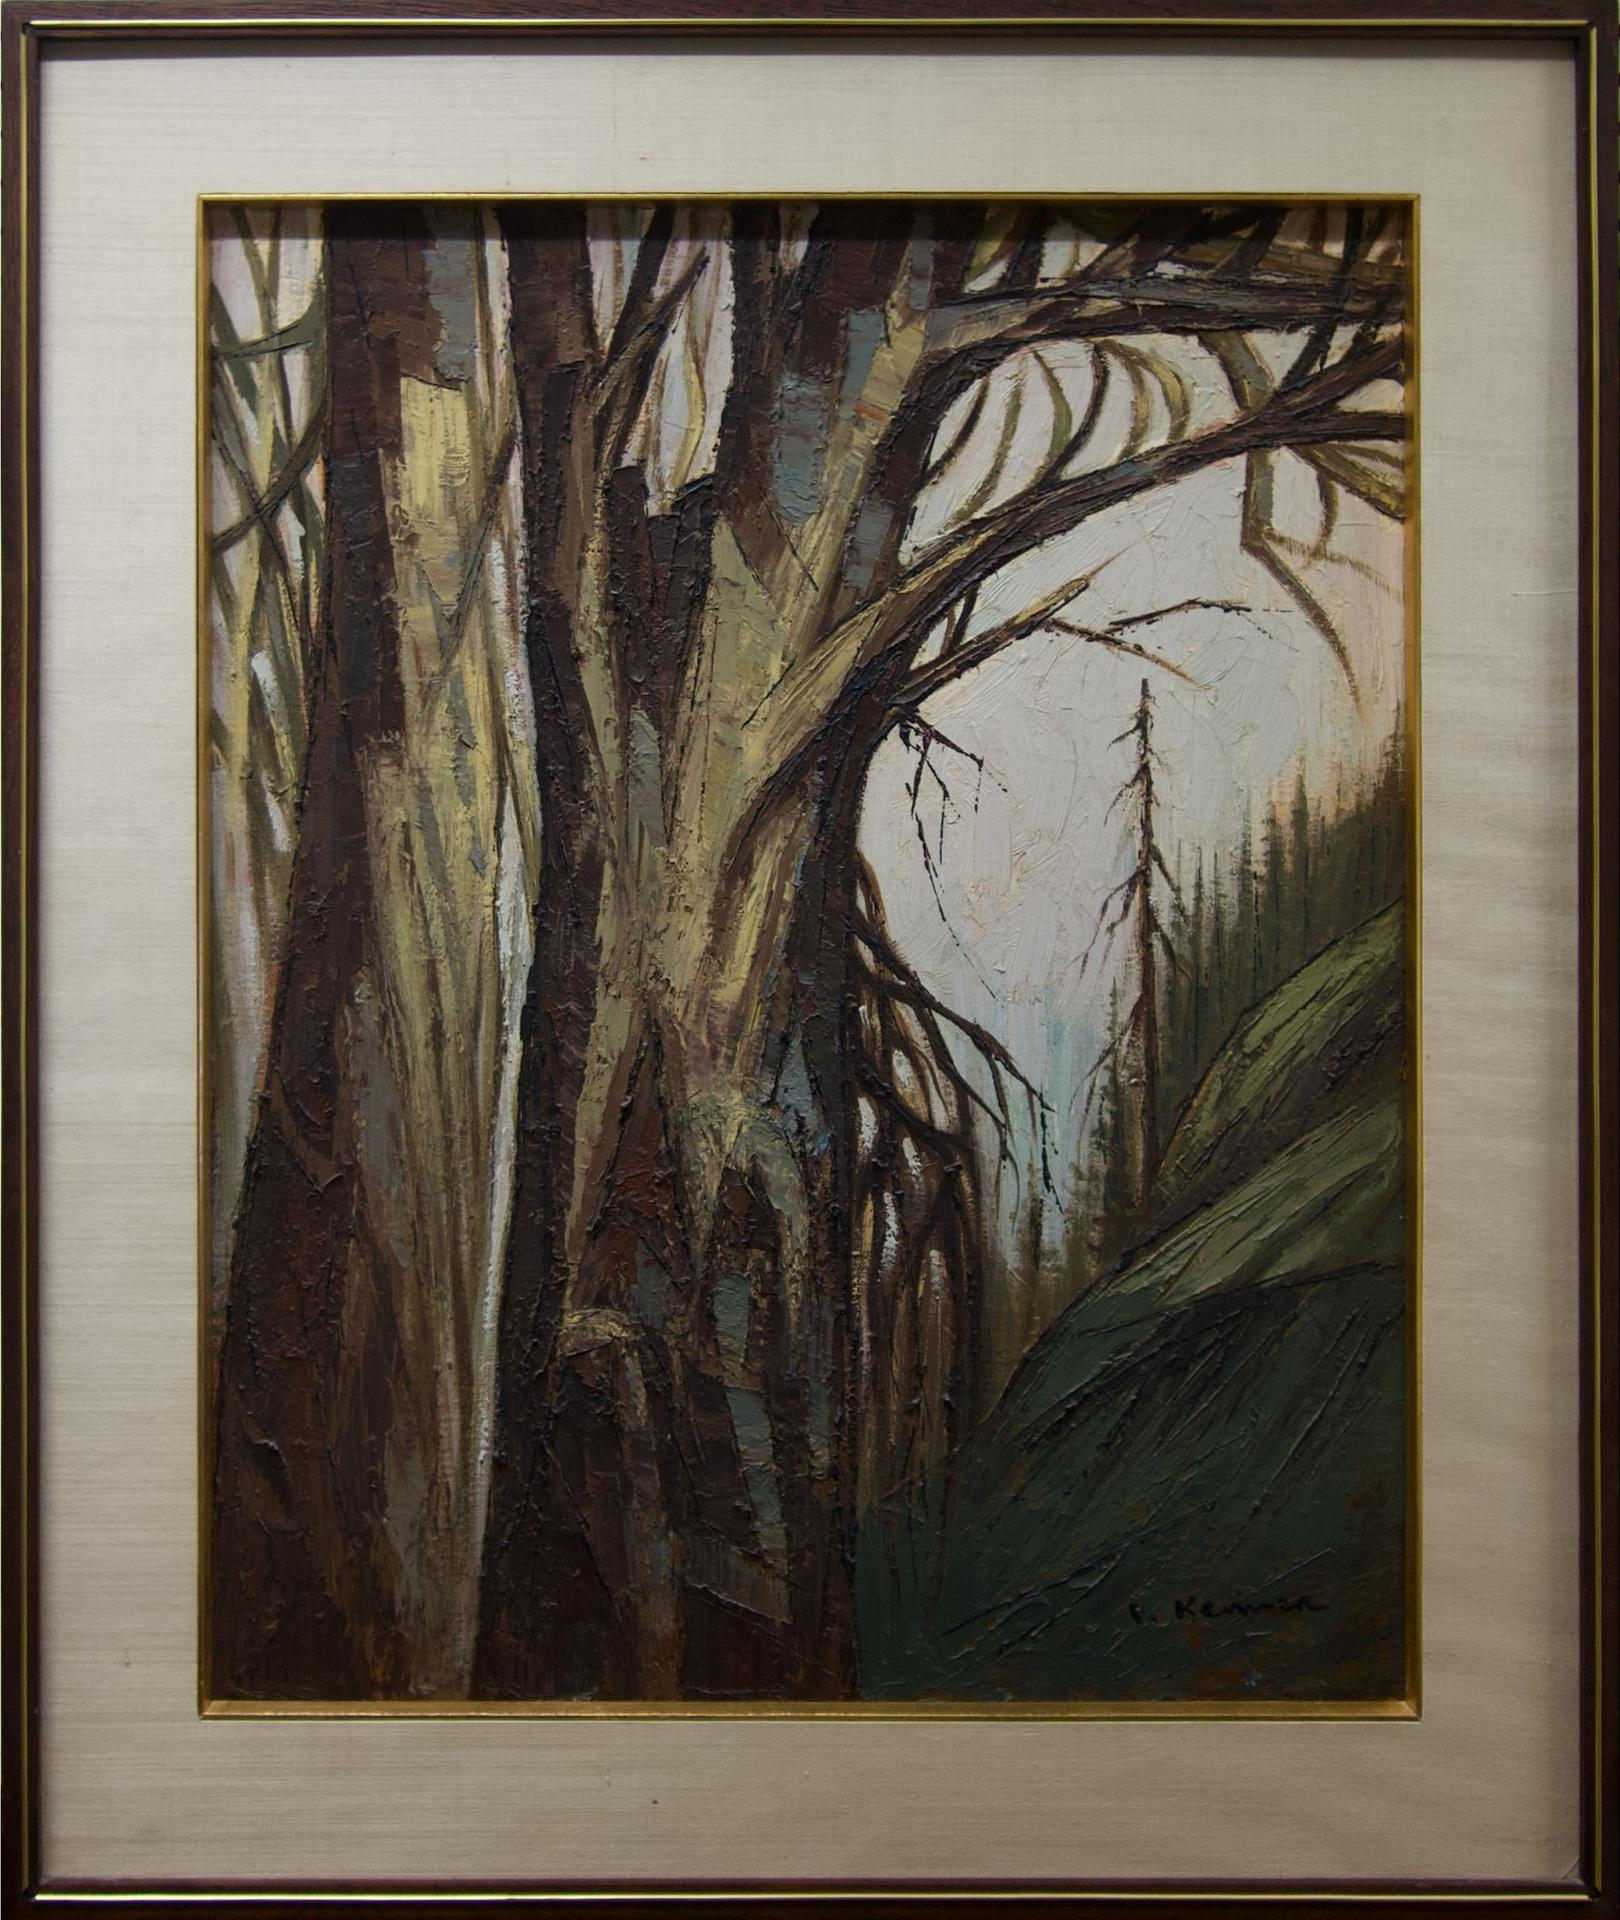 D. Kenner - Untitled (The Edge Of The Woods)